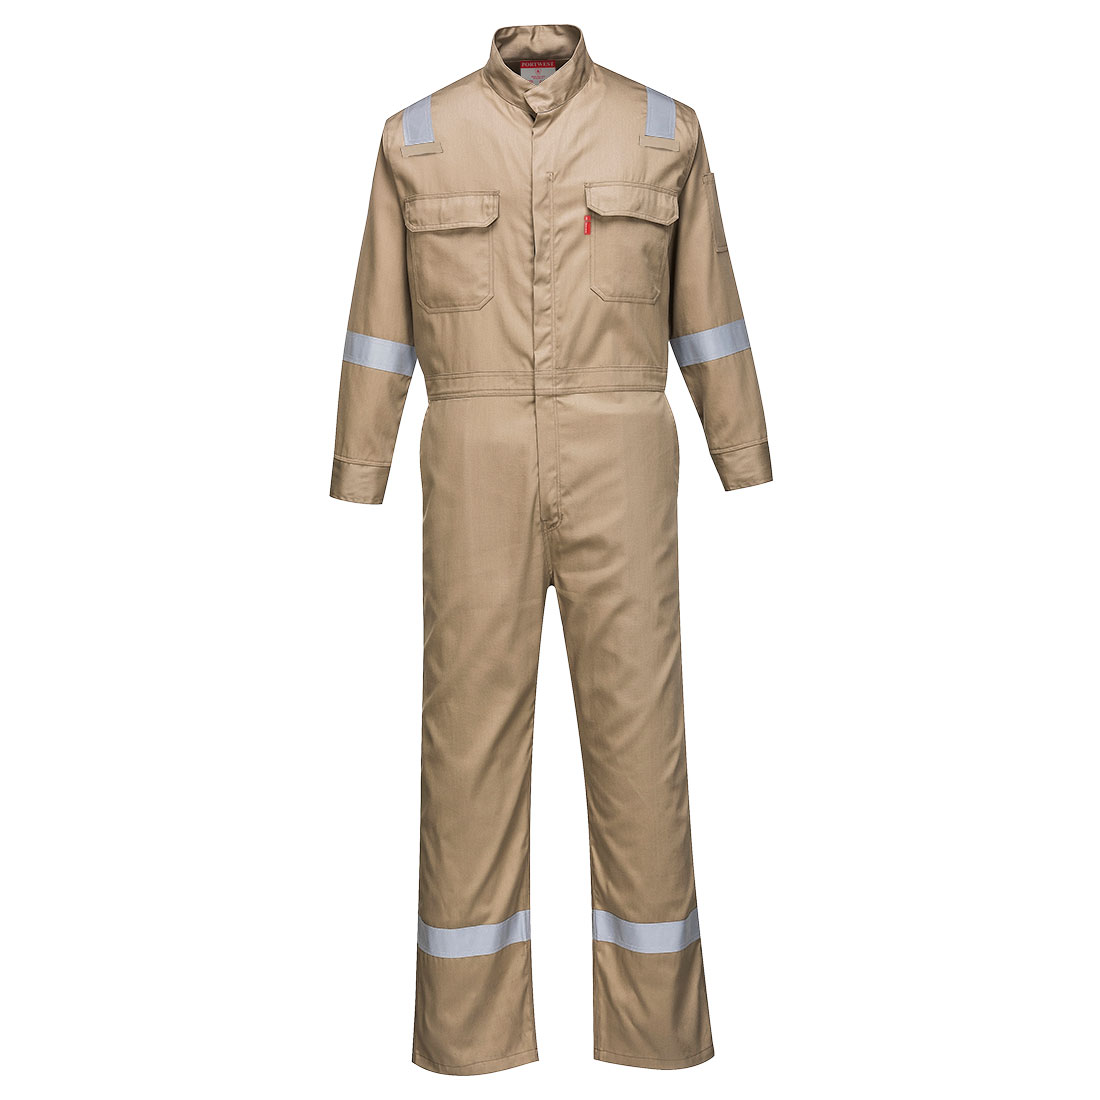 FR94 Portwest® Bizflame® 88/12 Iona Flame Resistant Work Coveralls - Khaki